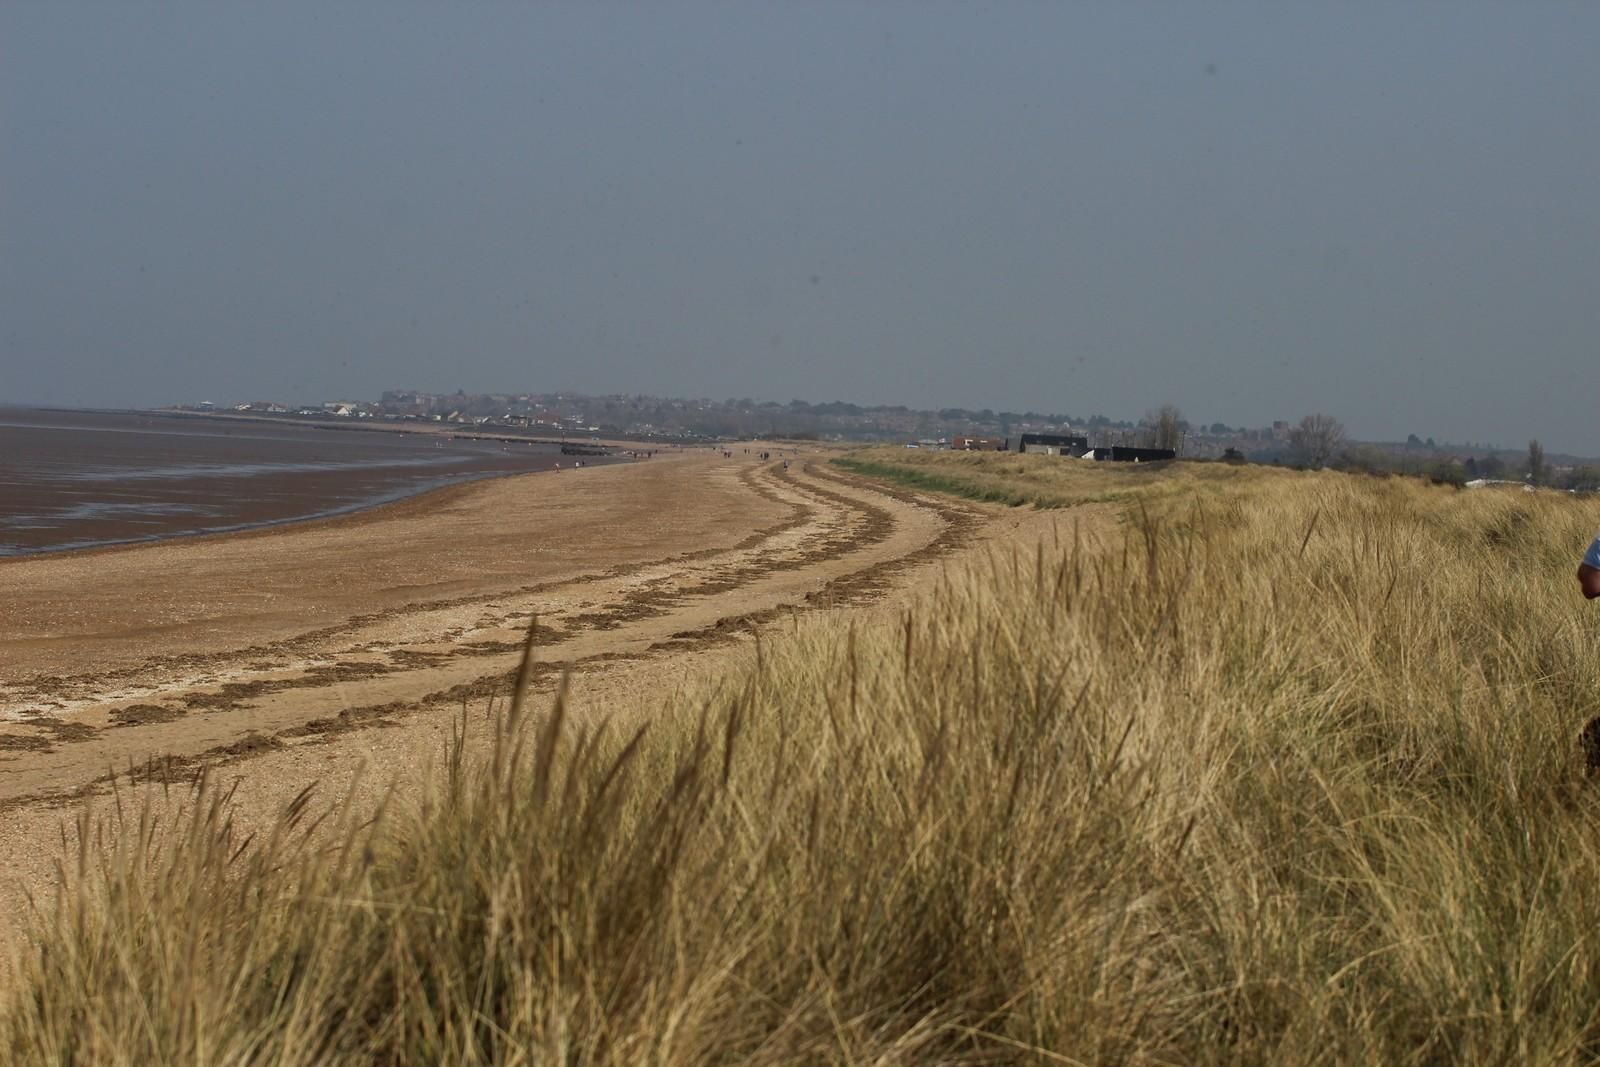 Snettisham Beach with nature filled sanddunes and sandy shores